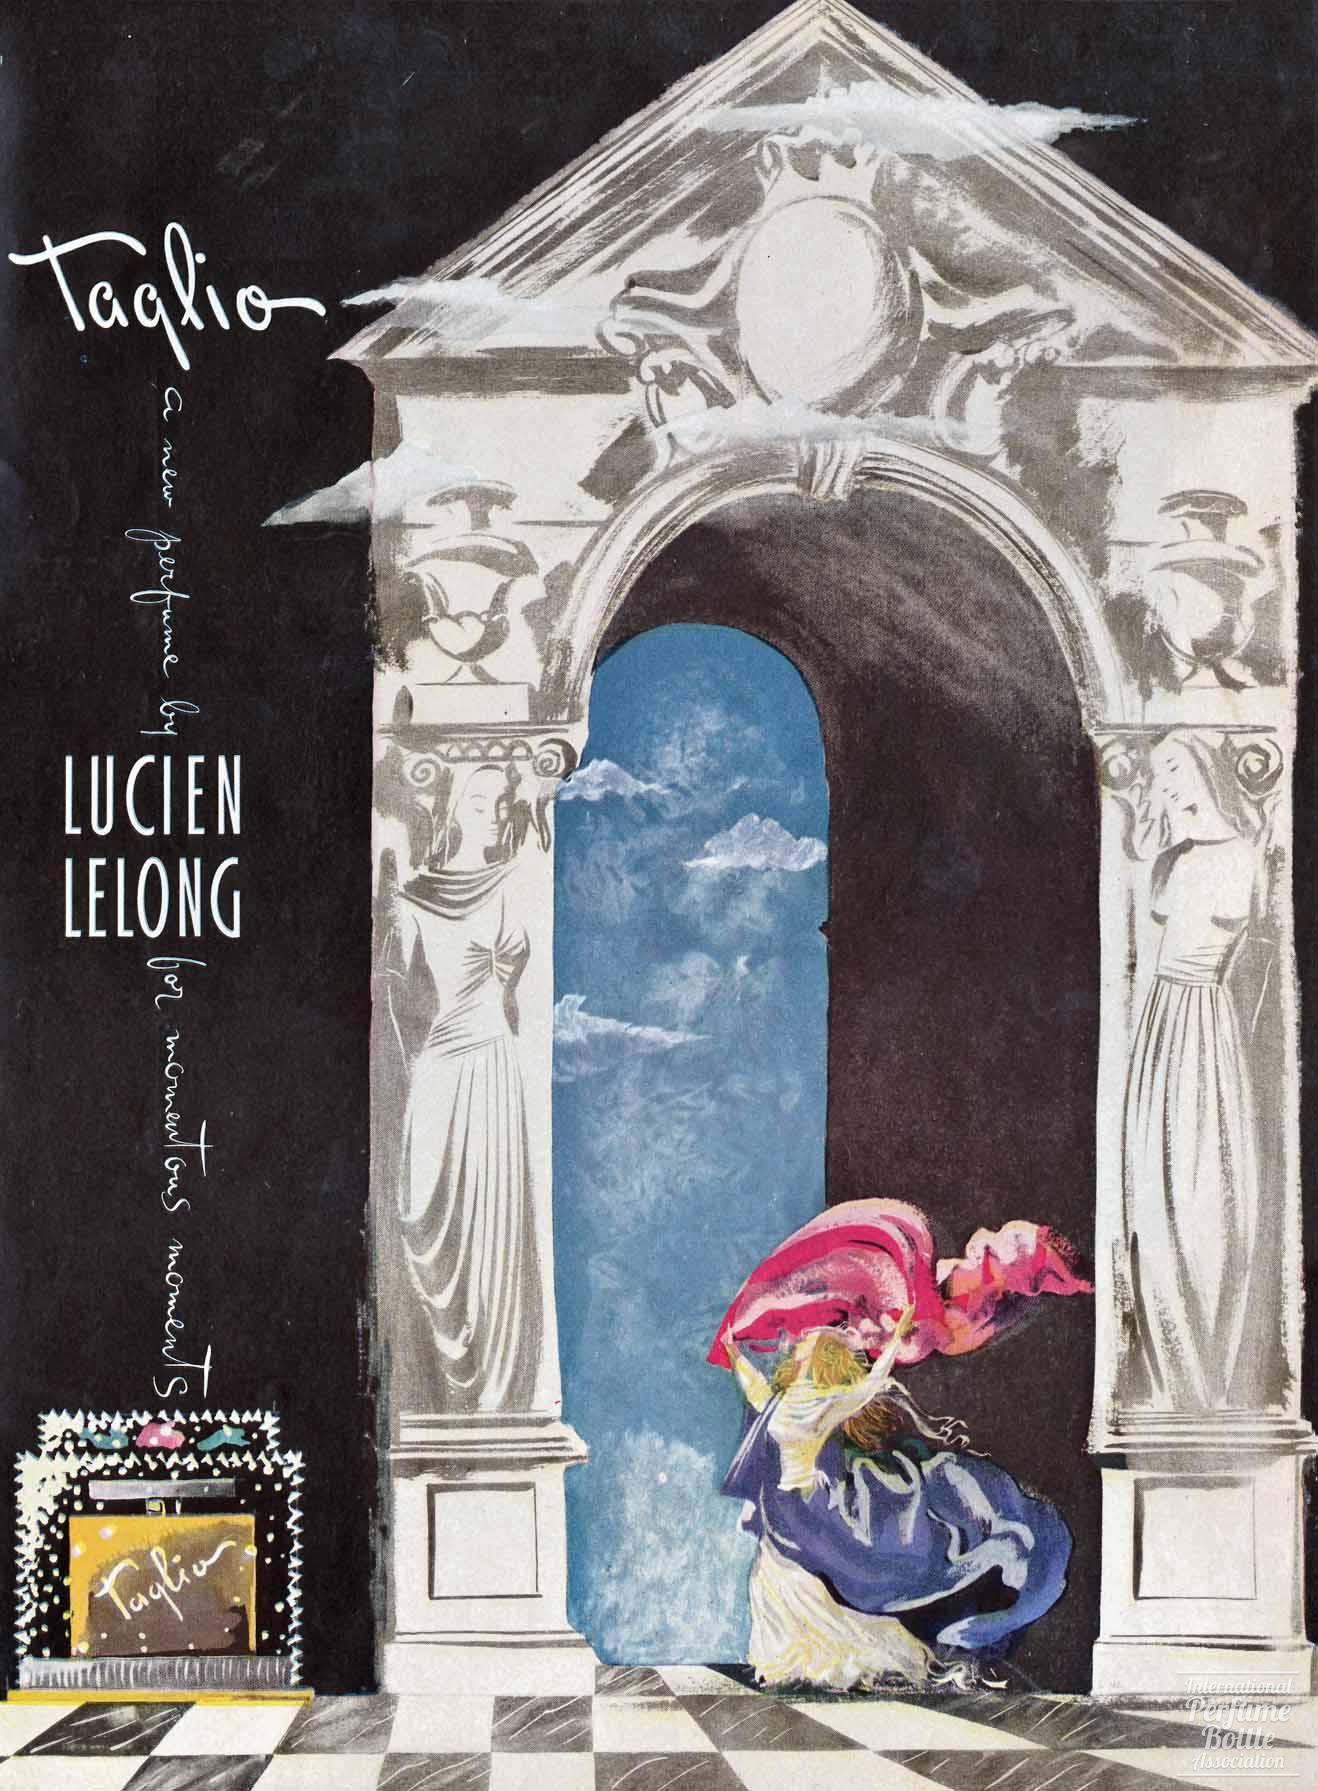 "Taglio" by Lucien Lelong Advertisement - 1946